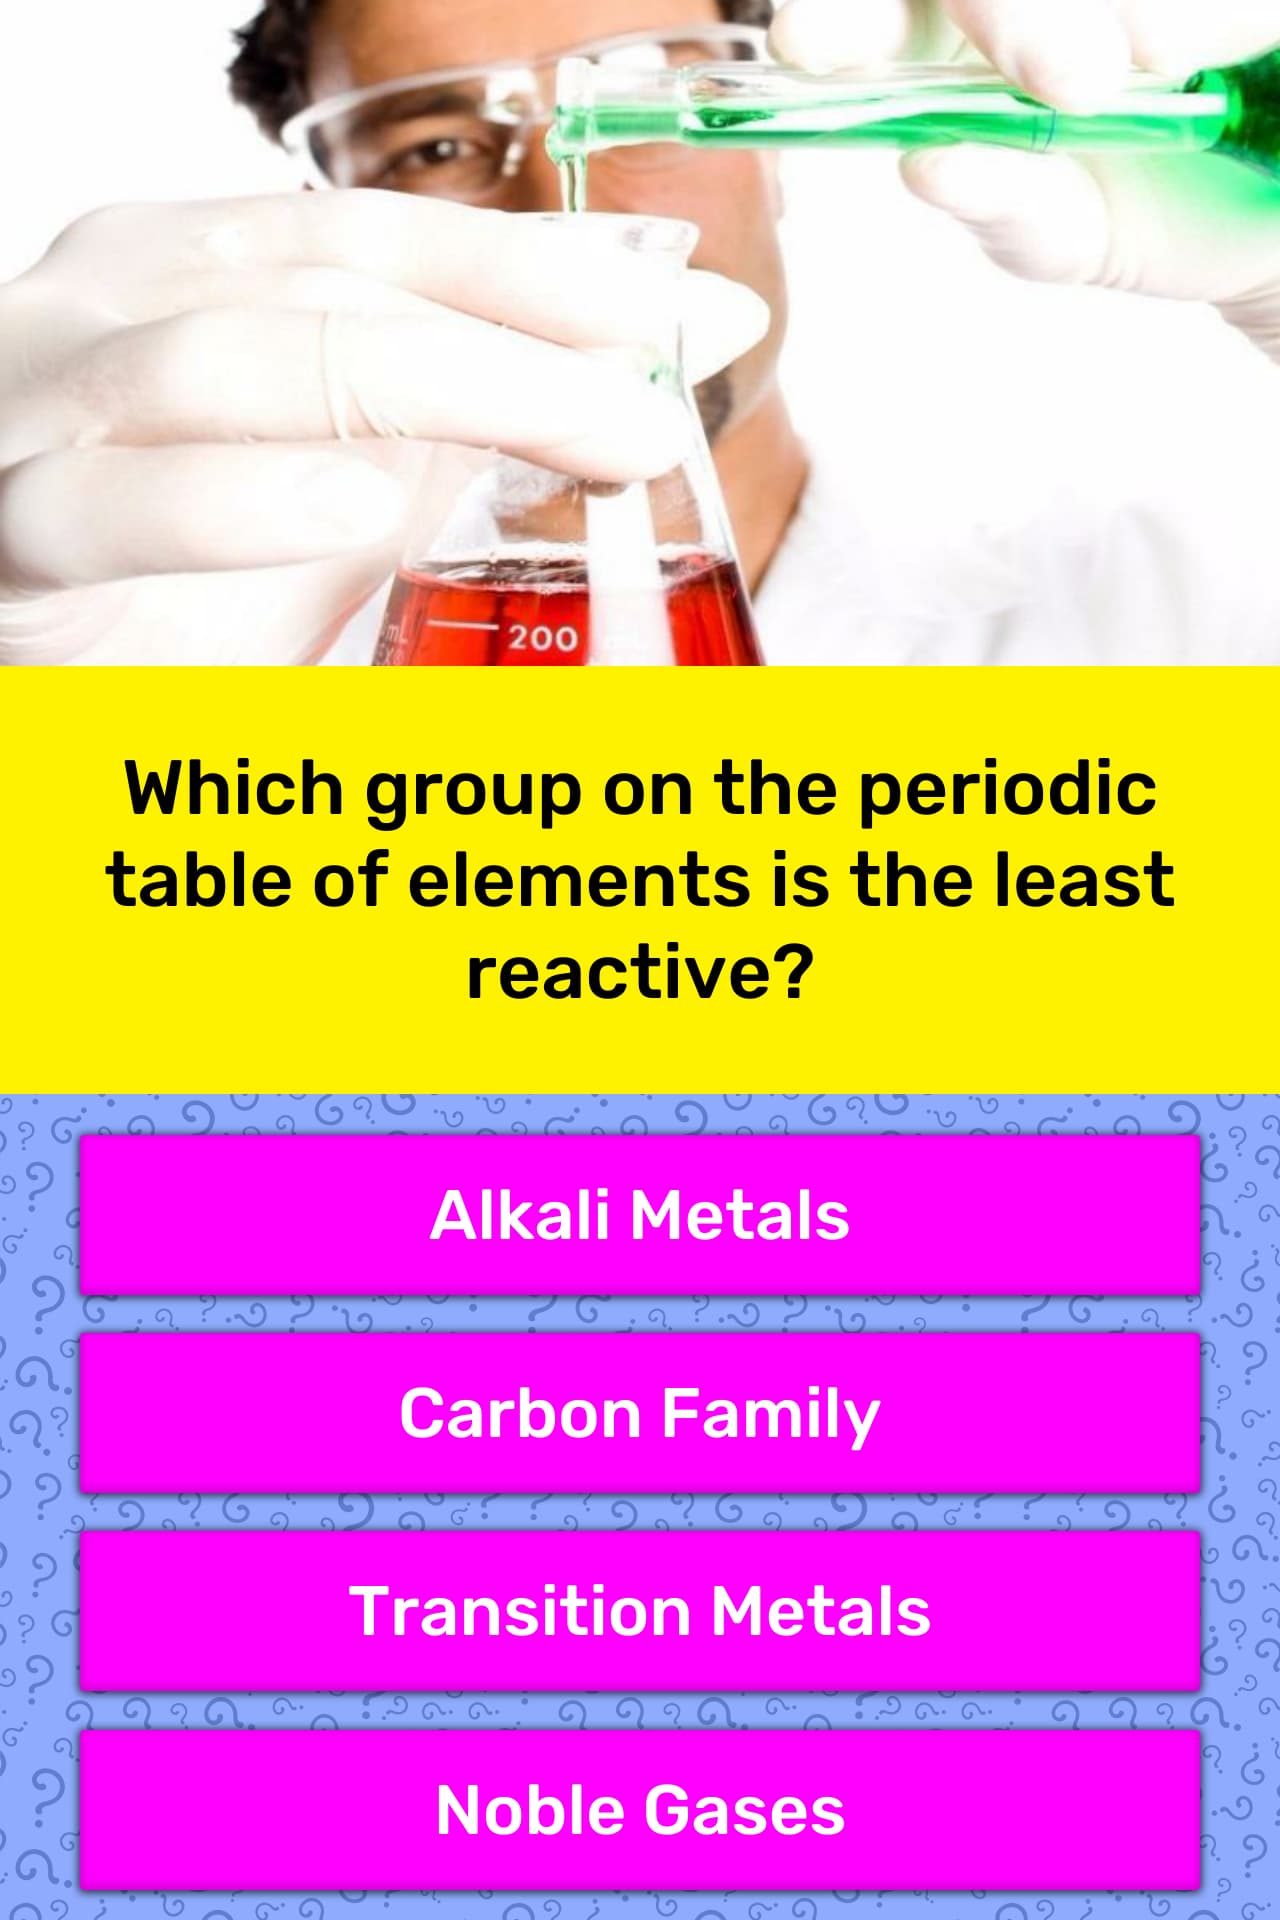 reactivity in periodic table video